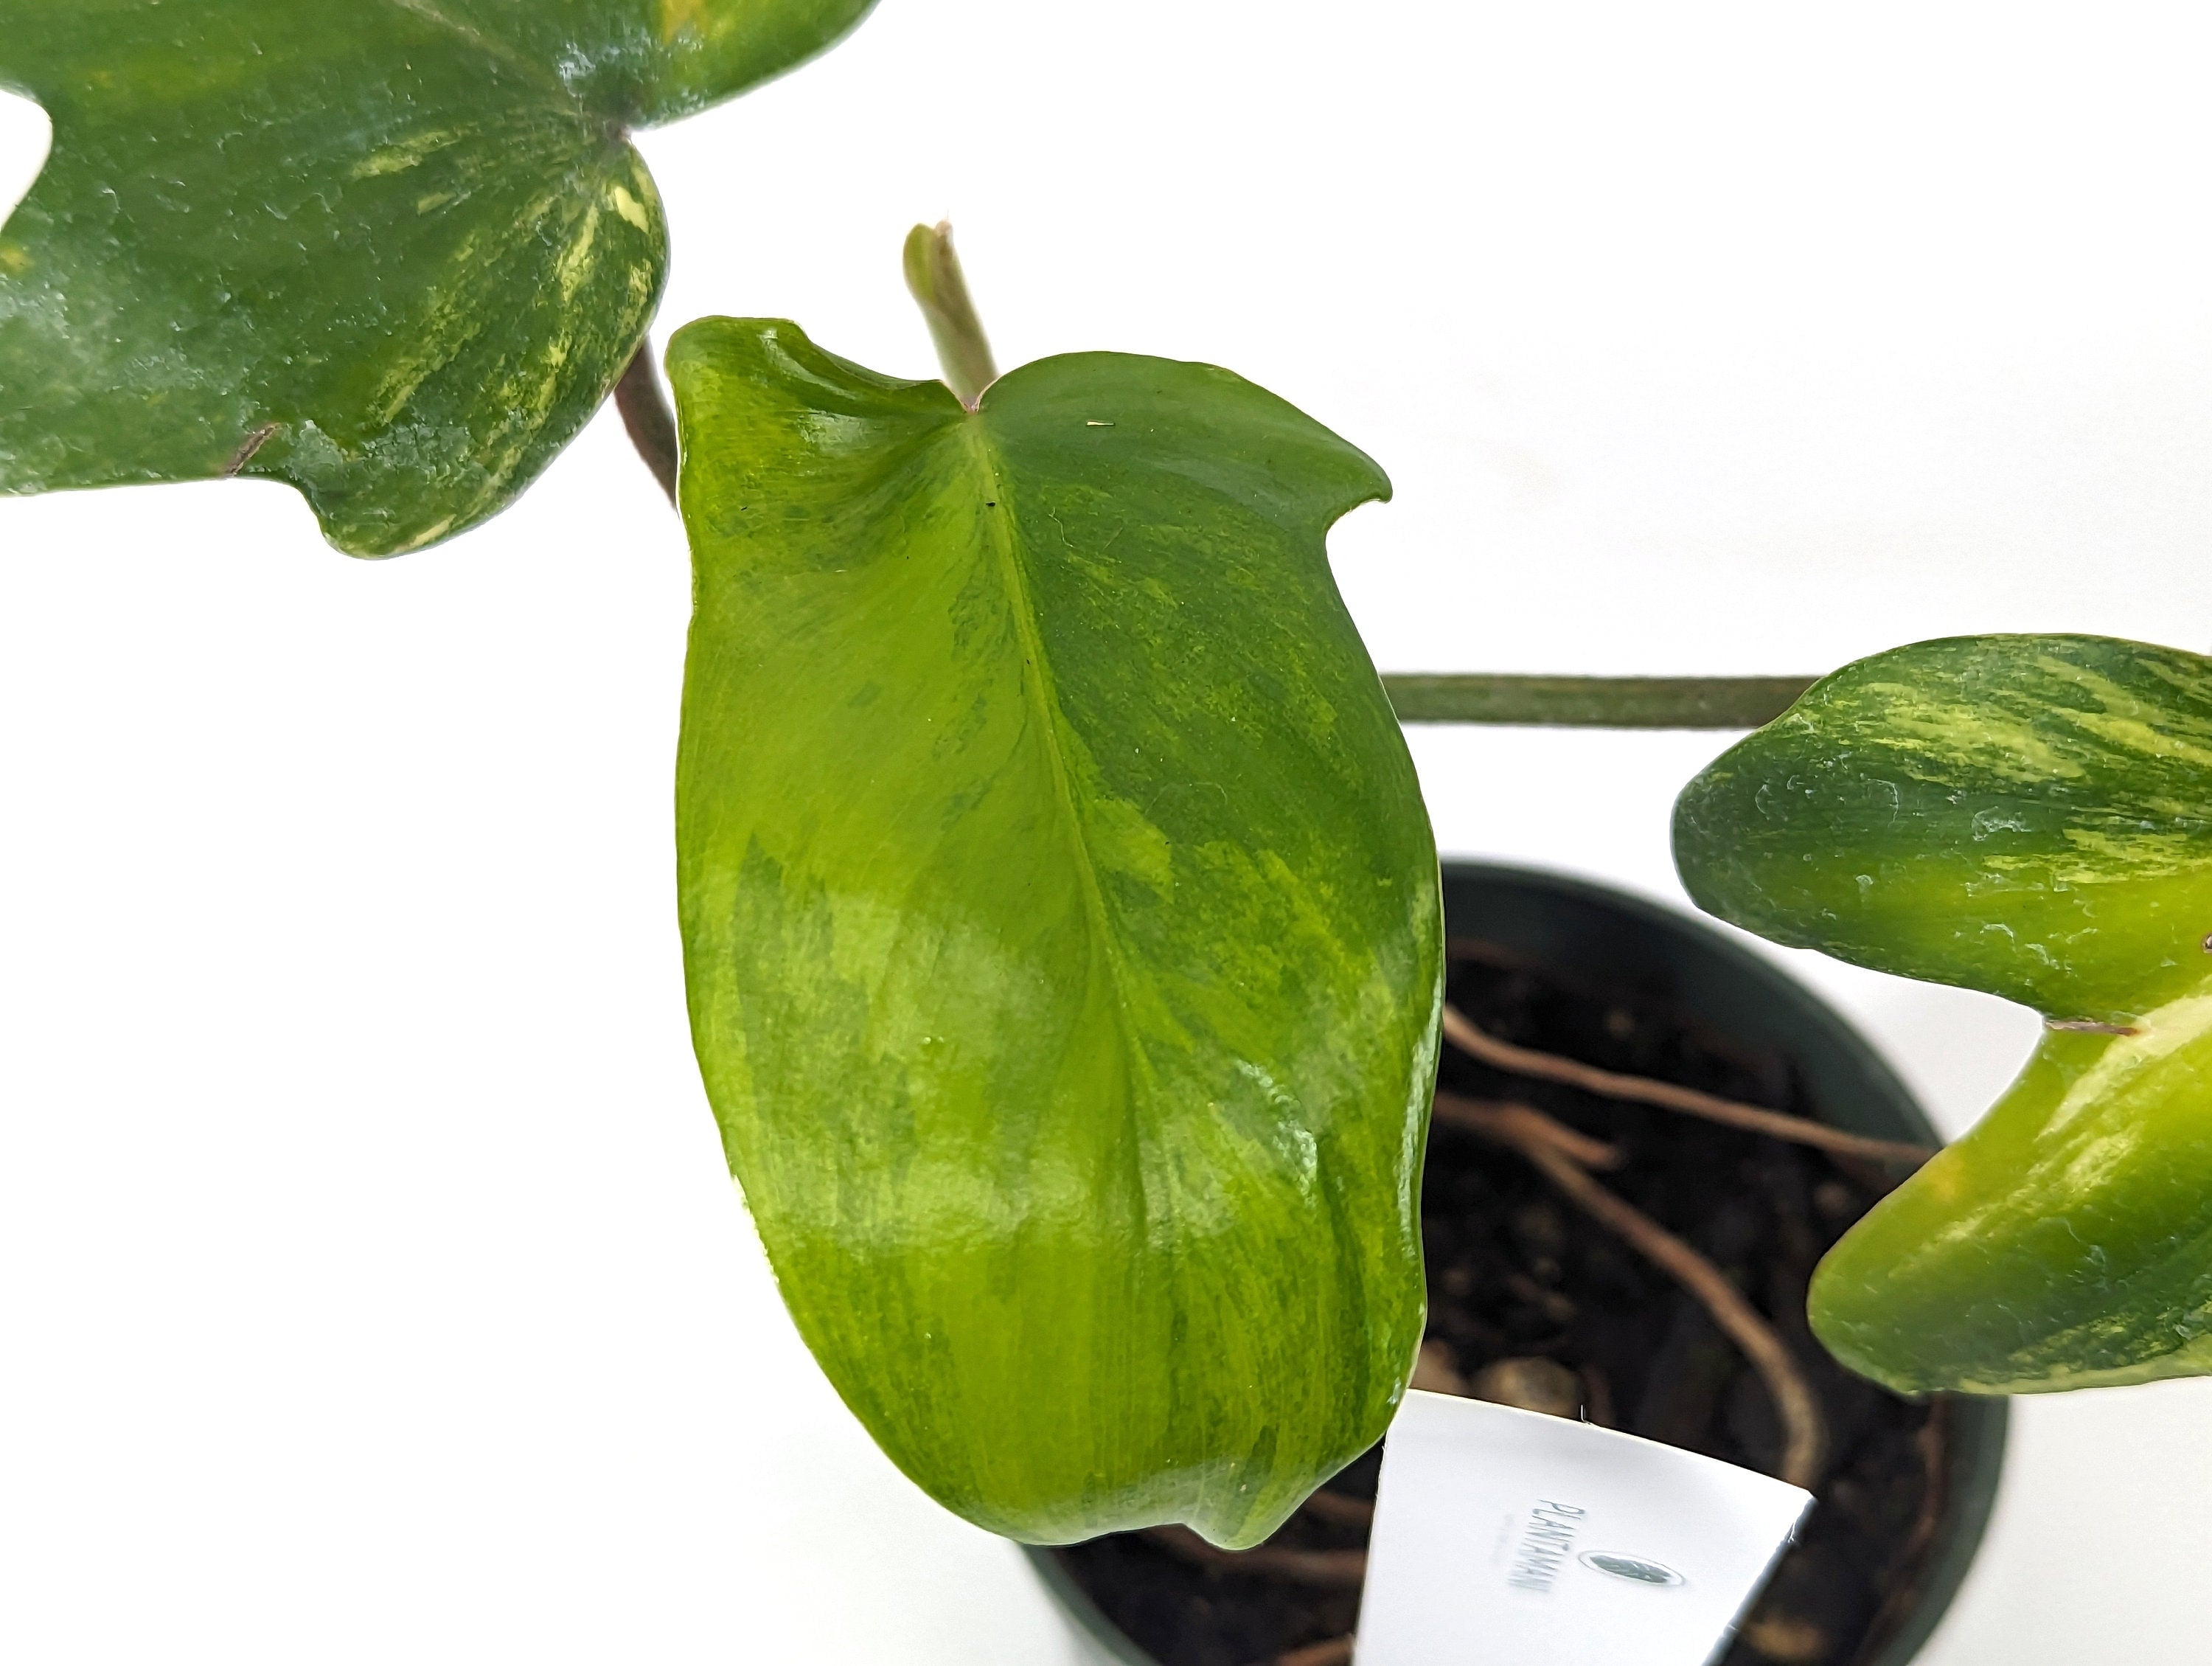 Philodendron Florida Beauty - Exact Plants Pictured